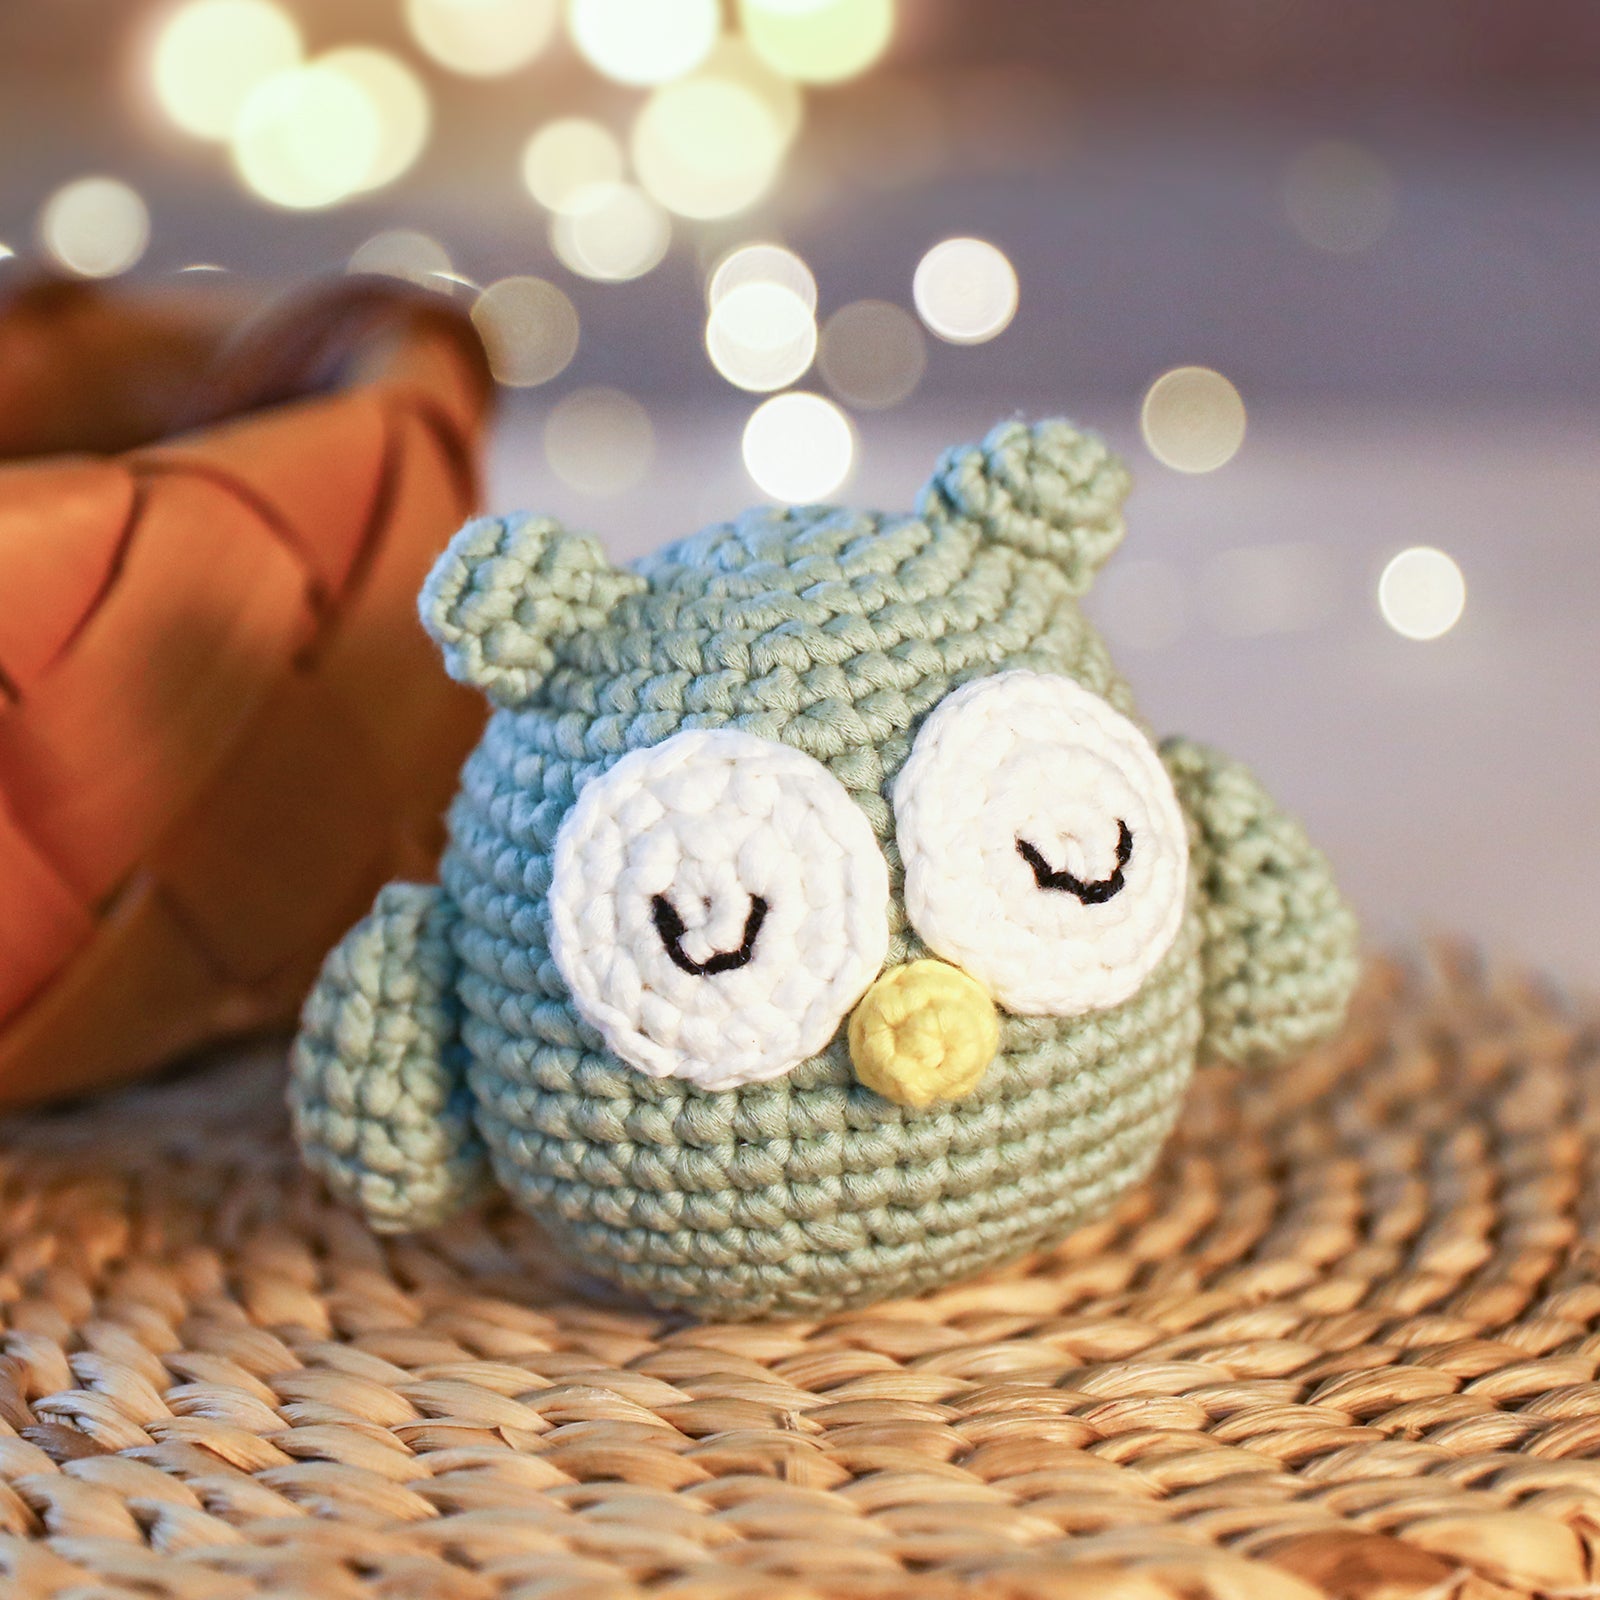 CrochetBox Complete Beginners Crochet Kit - All You Need for Easy Crocheting, Step-by-Step Video Tutorials, Sleeping Owl Crochet Kit, Animal Design, Birthday or Holiday Gift for Adults, Teens.